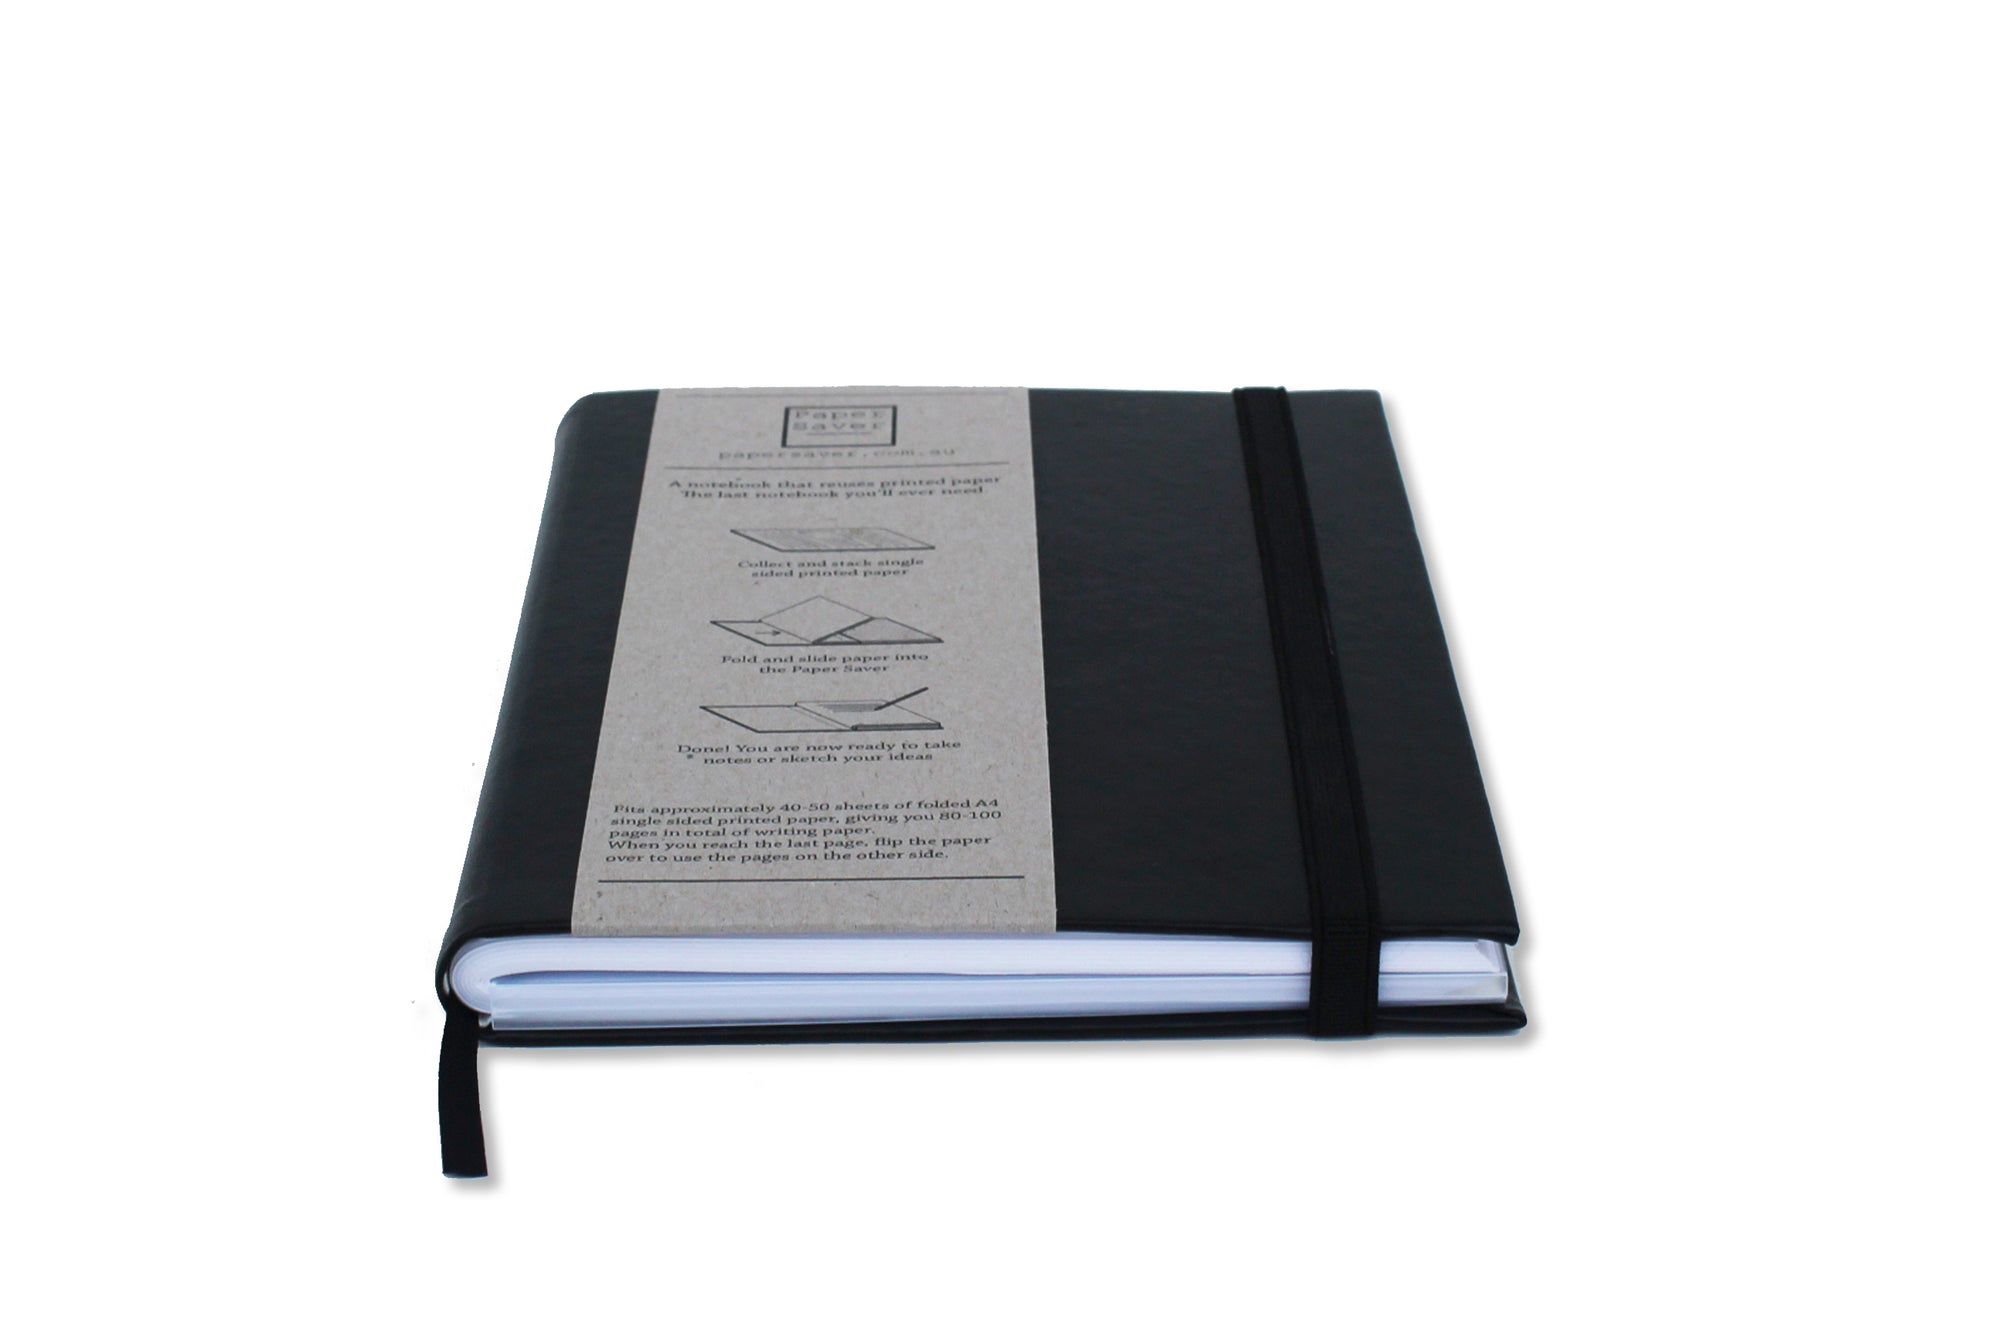 Paper Saver Eco Notebook Original design with plastic sleeve inside for paper insertion